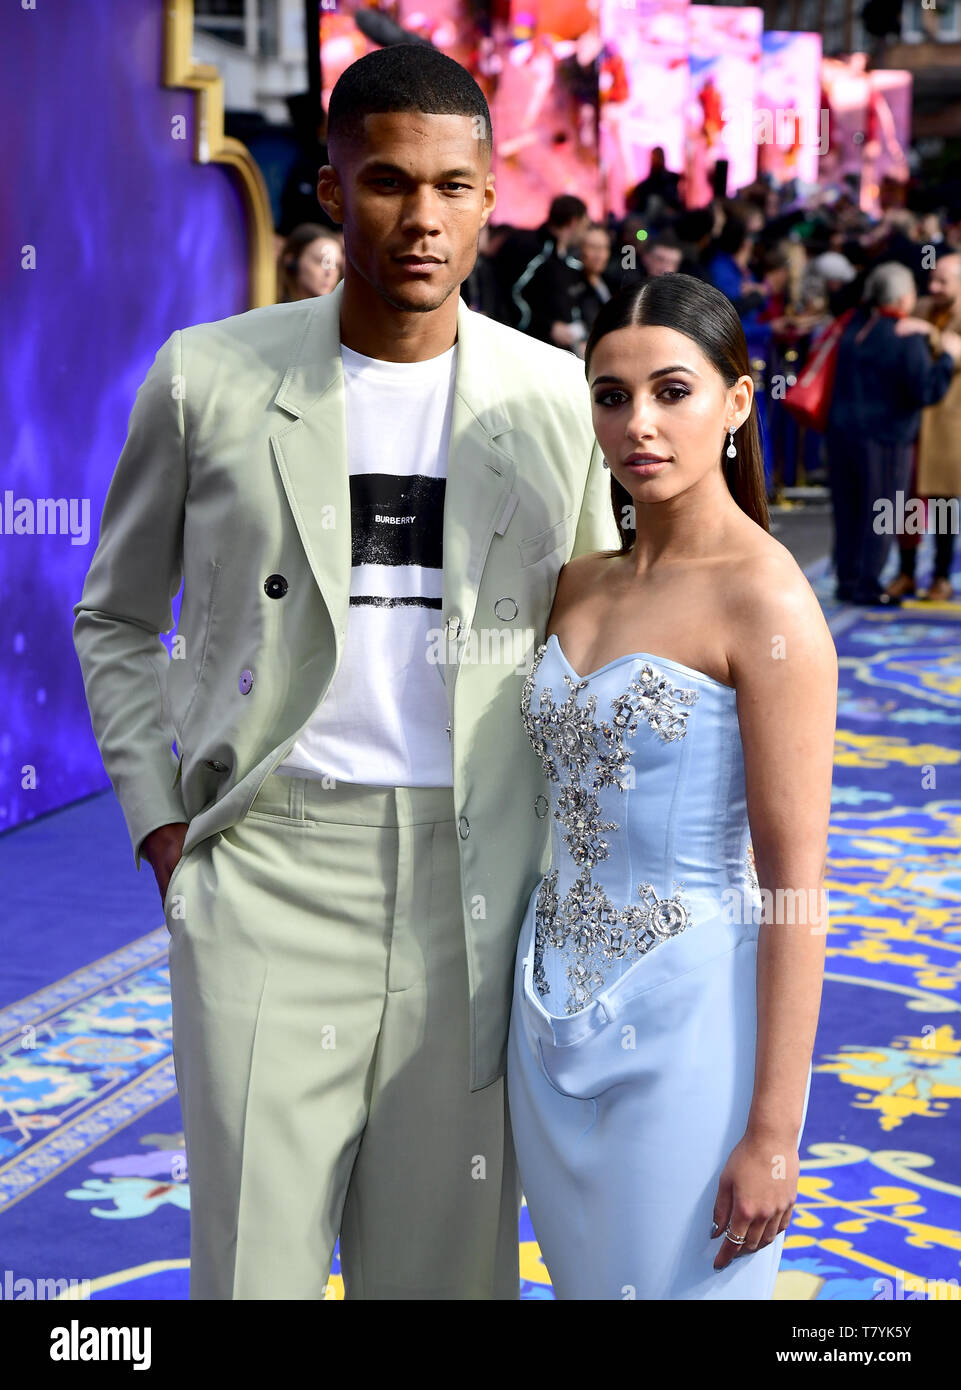 Jordan Spence and Naomi Scott attending the Aladdin European Premiere held  at the Odeon Luxe Leicester Square, London Stock Photo - Alamy